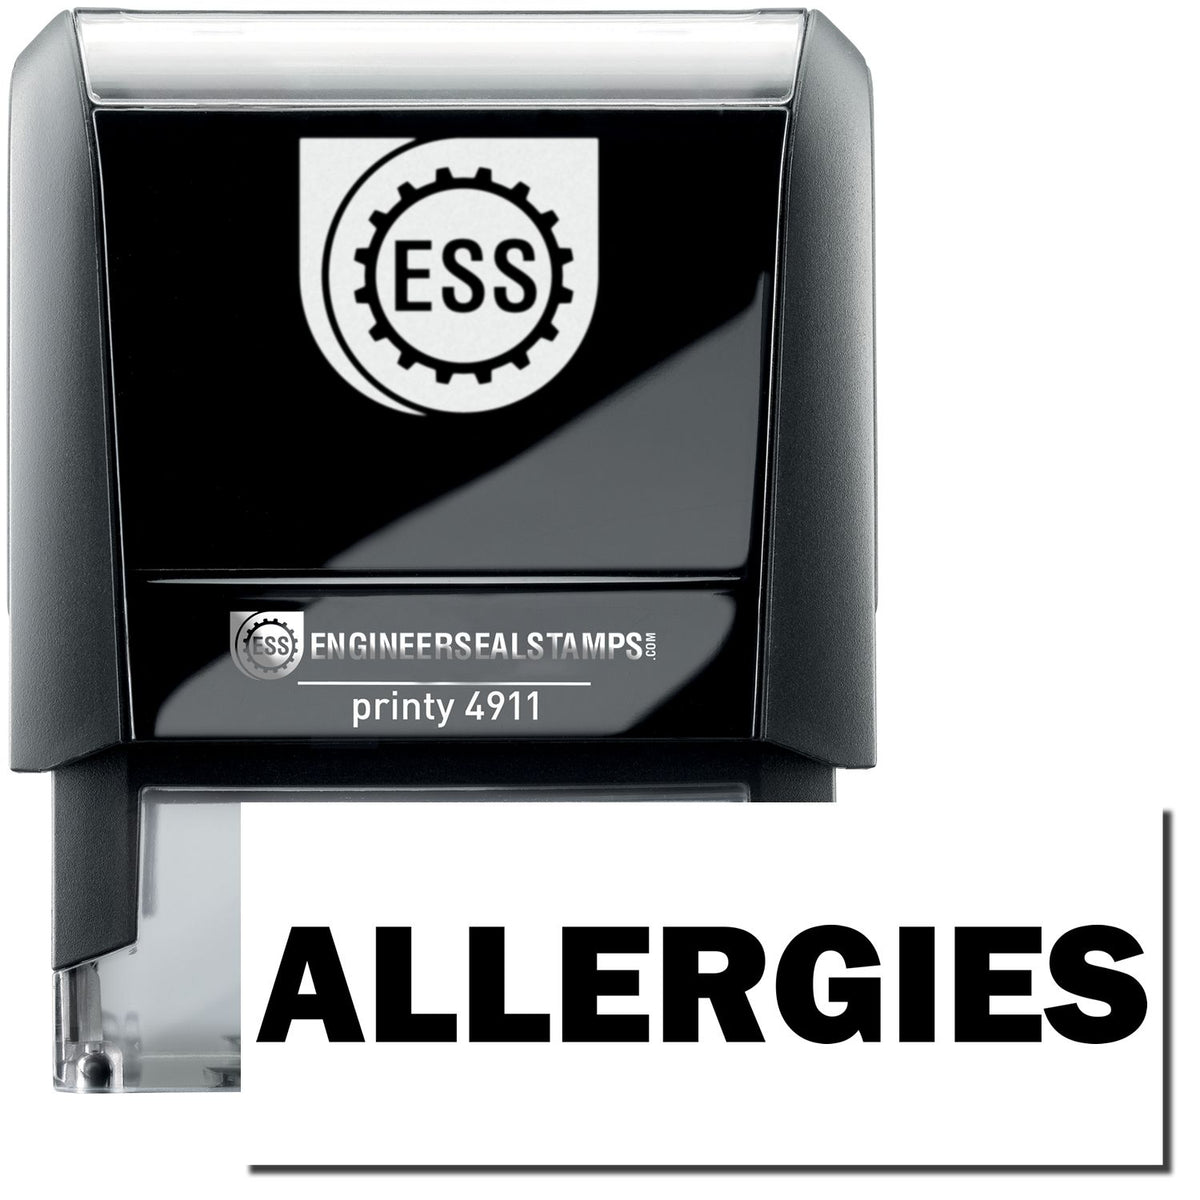 A self-inking stamp with a stamped image showing how the text &quot;ALLERGIES&quot; in bold font is displayed after stamping.